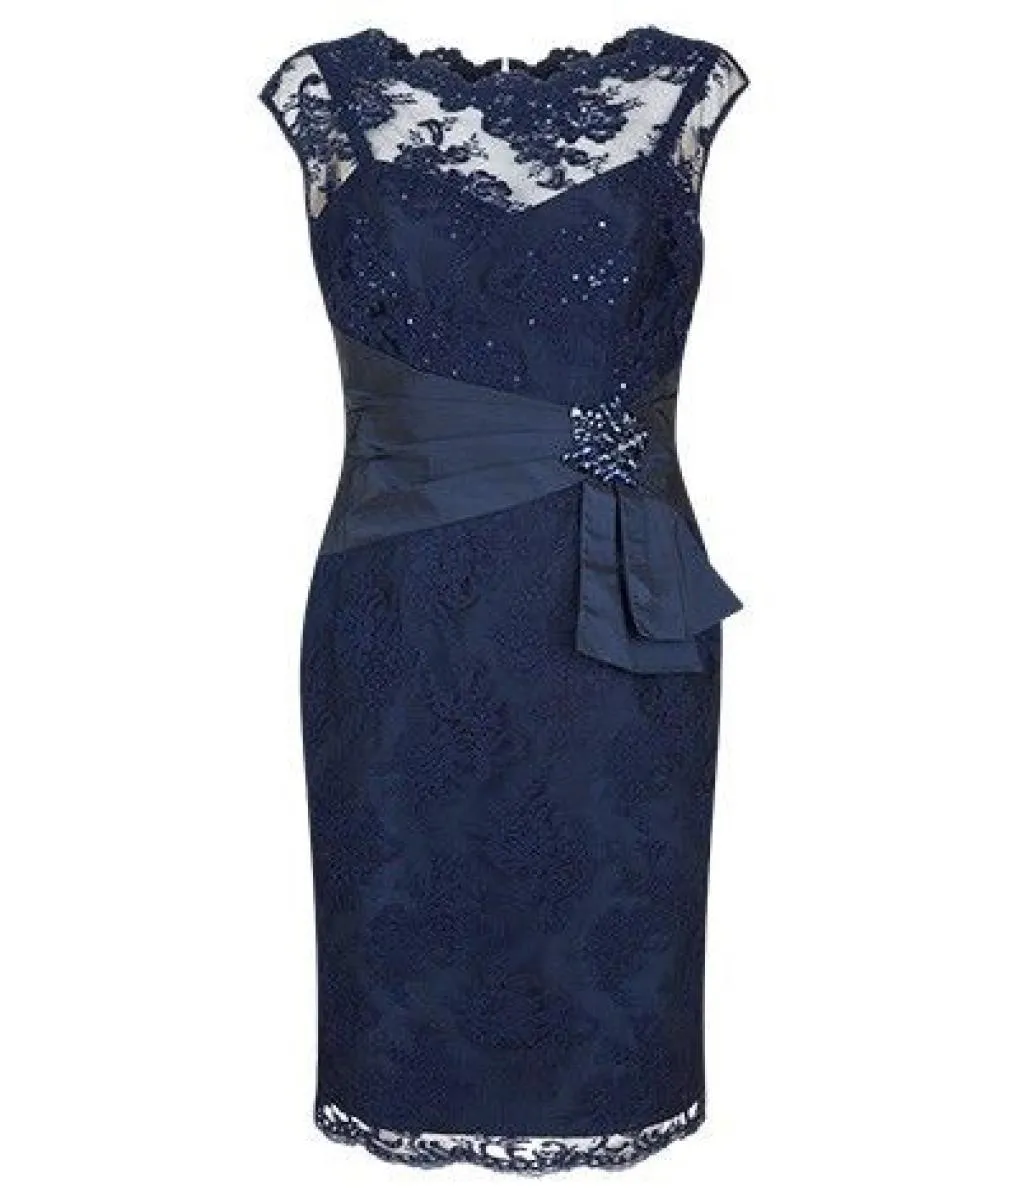 Dark Navy Blue Kne Length Mother of the Bride Dresses For Wedding Party Mother of the Groom Dresses9067613